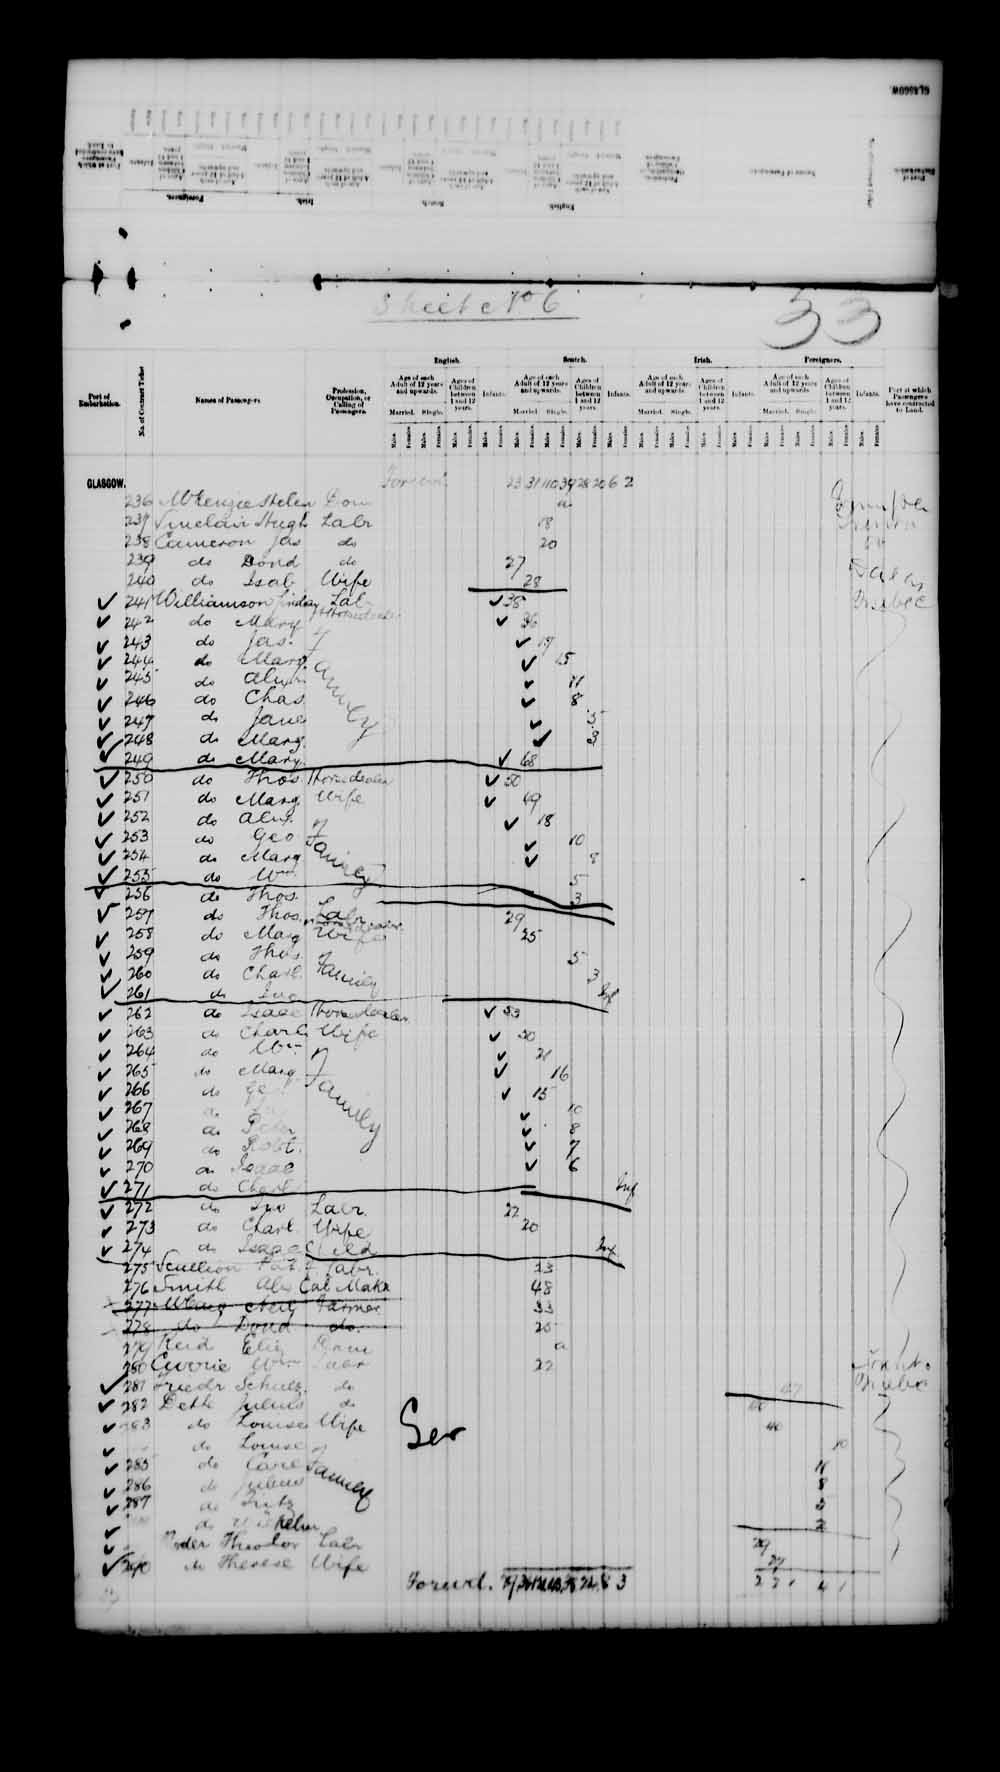 Digitized page of Passenger Lists for Image No.: e003543094